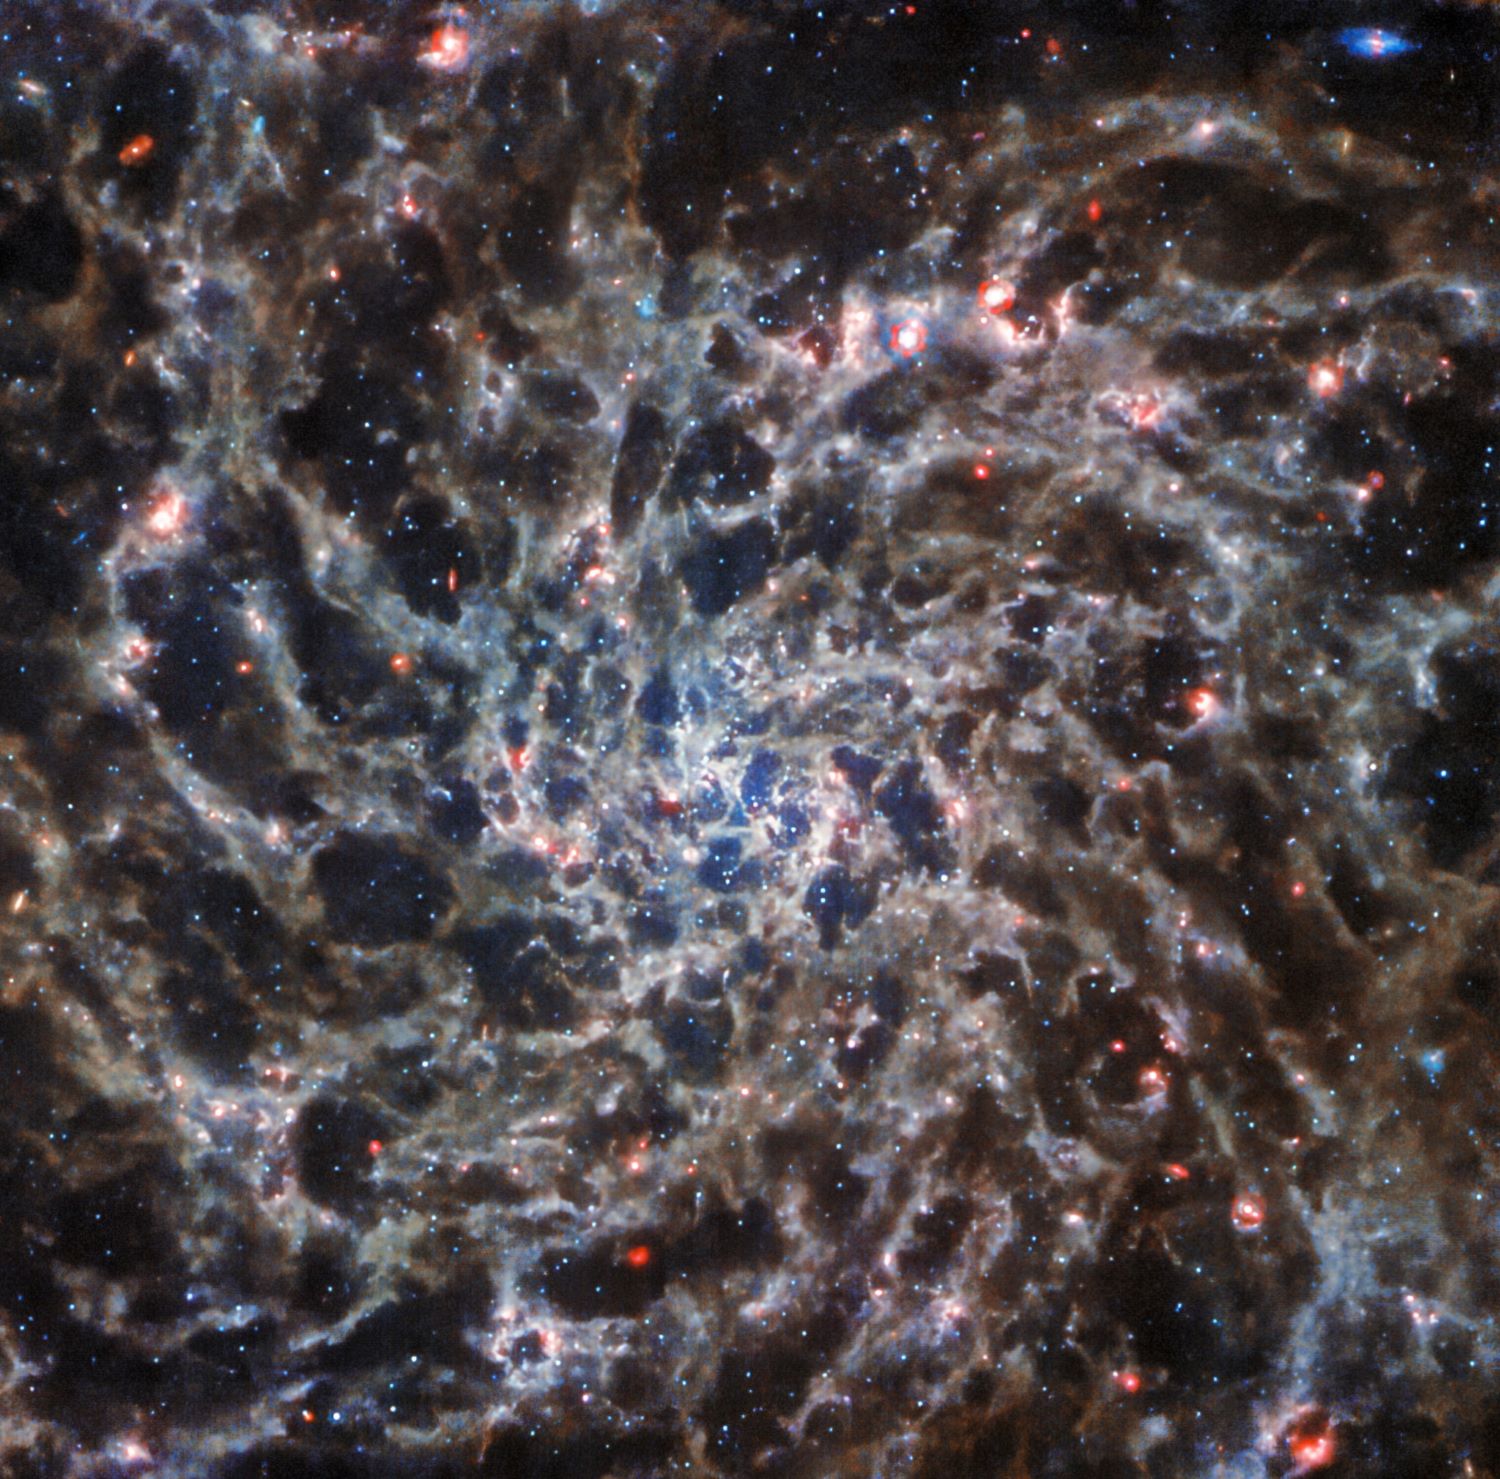 A galaxy in the shape of a spiral with arms like cobwebs.